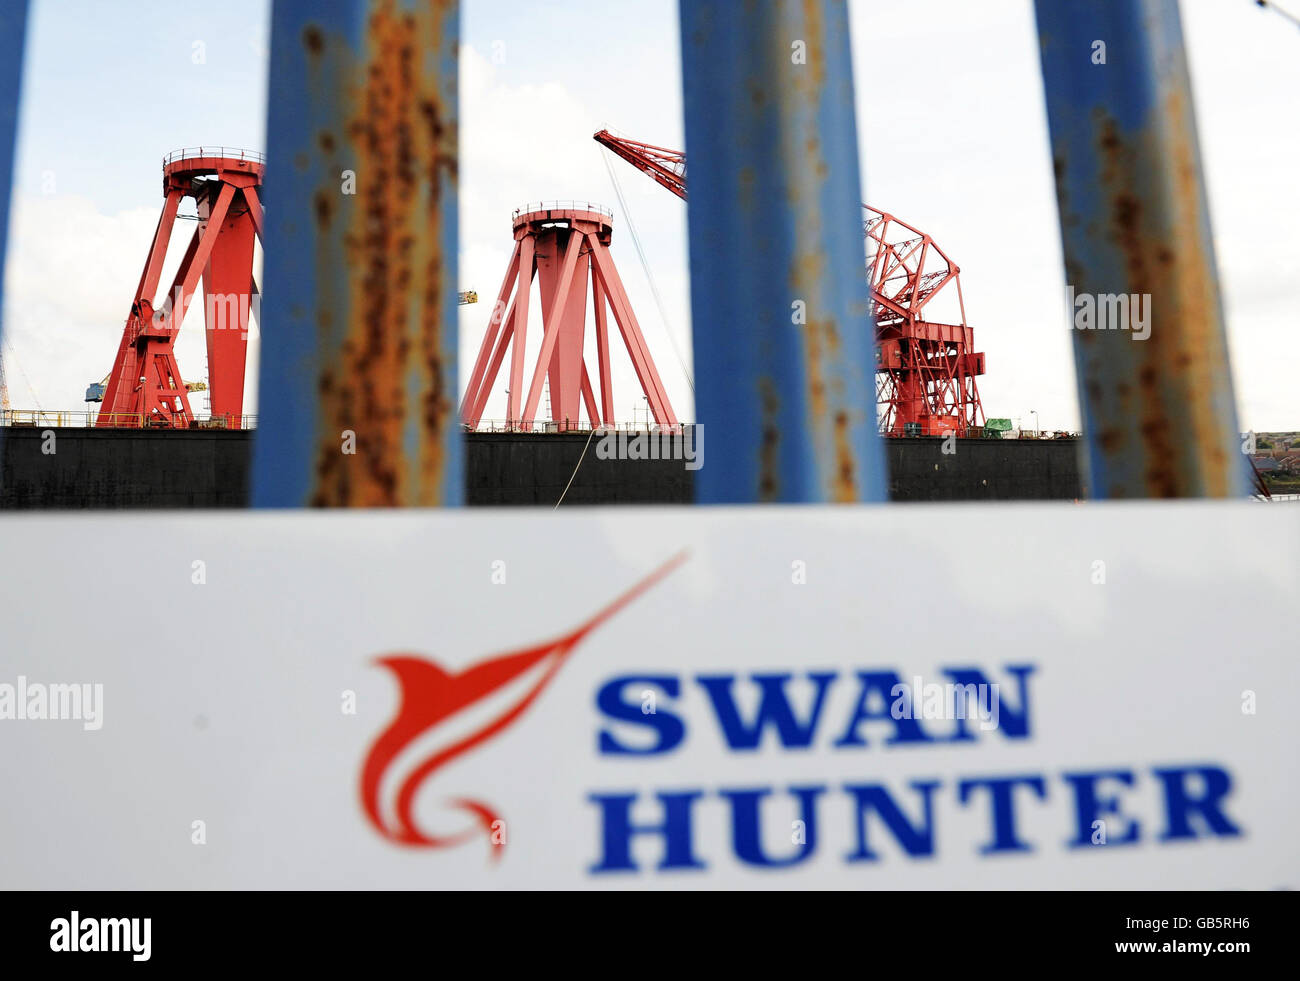 STANDALONE Photo. The Swan Hunter shipyard on the River Tyne. The cranes are slowly being dismantled at the dormant shipyard once famous for employing over 1000 workers on the River Tyne. Stock Photo